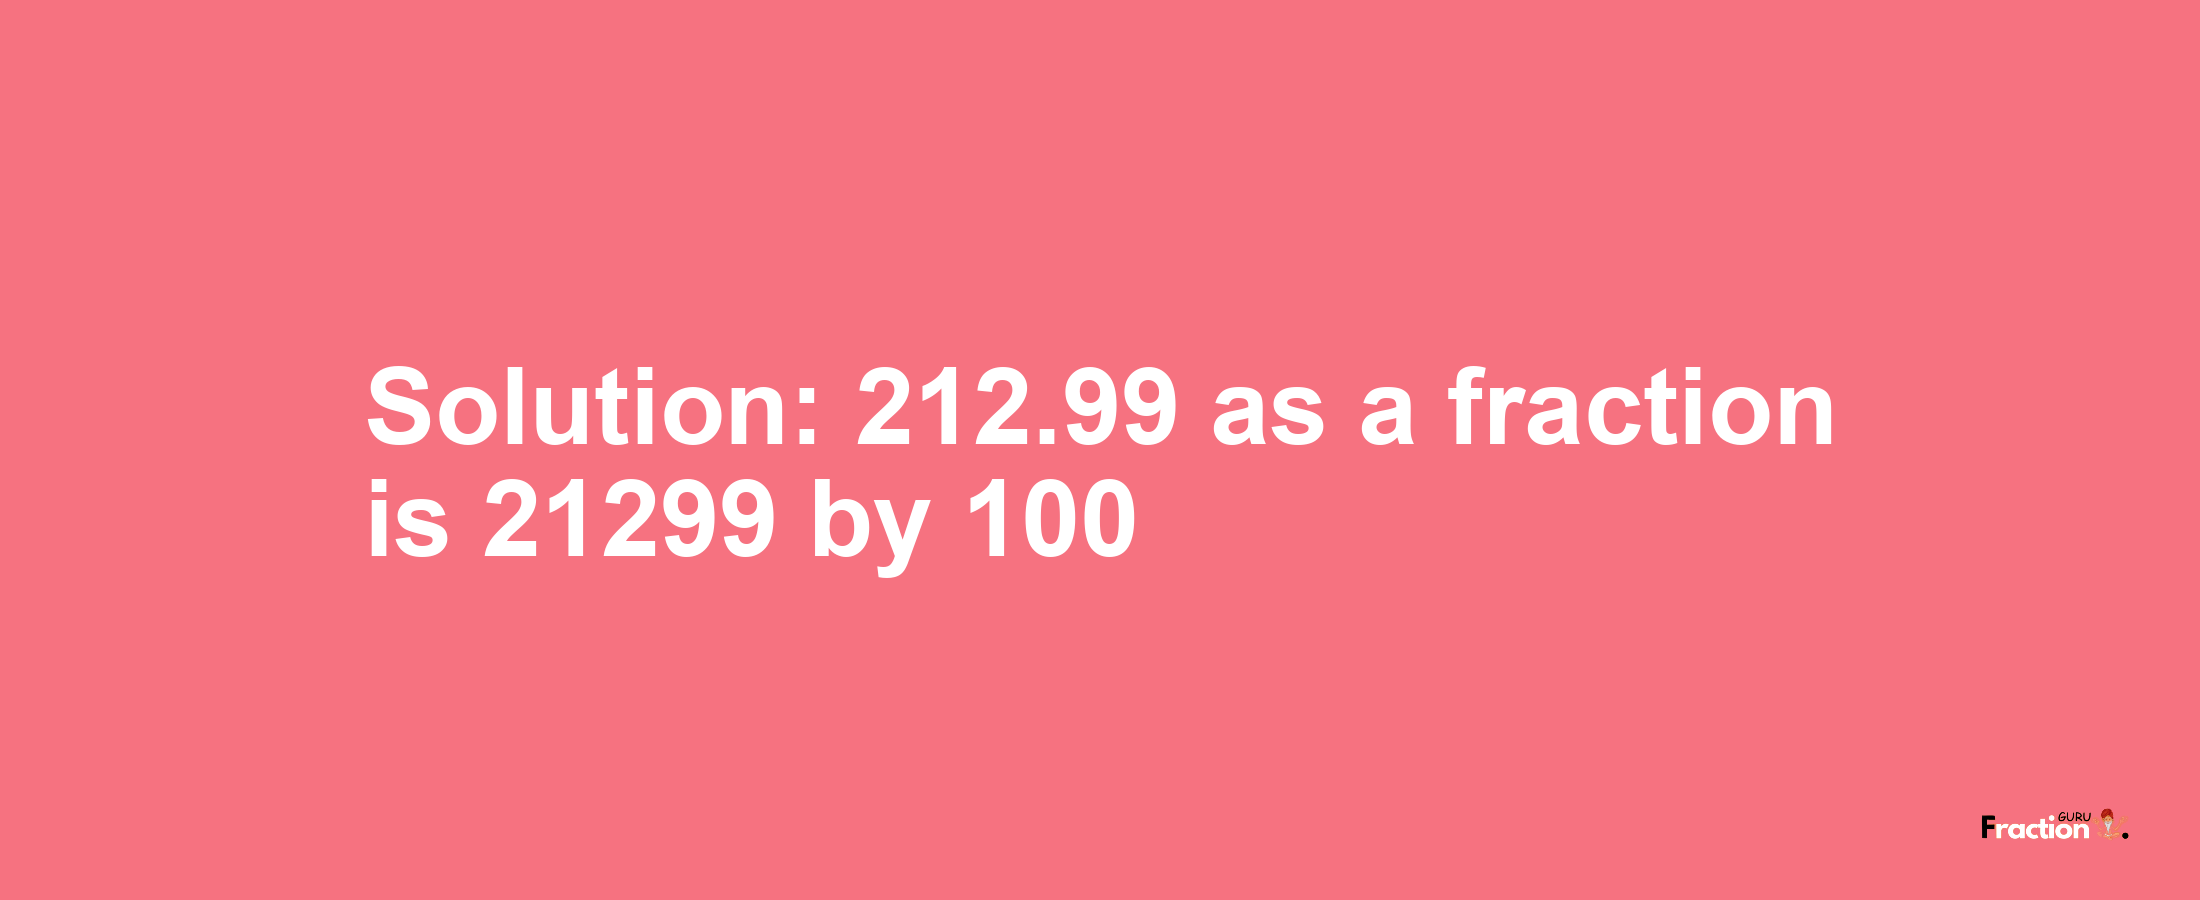 Solution:212.99 as a fraction is 21299/100